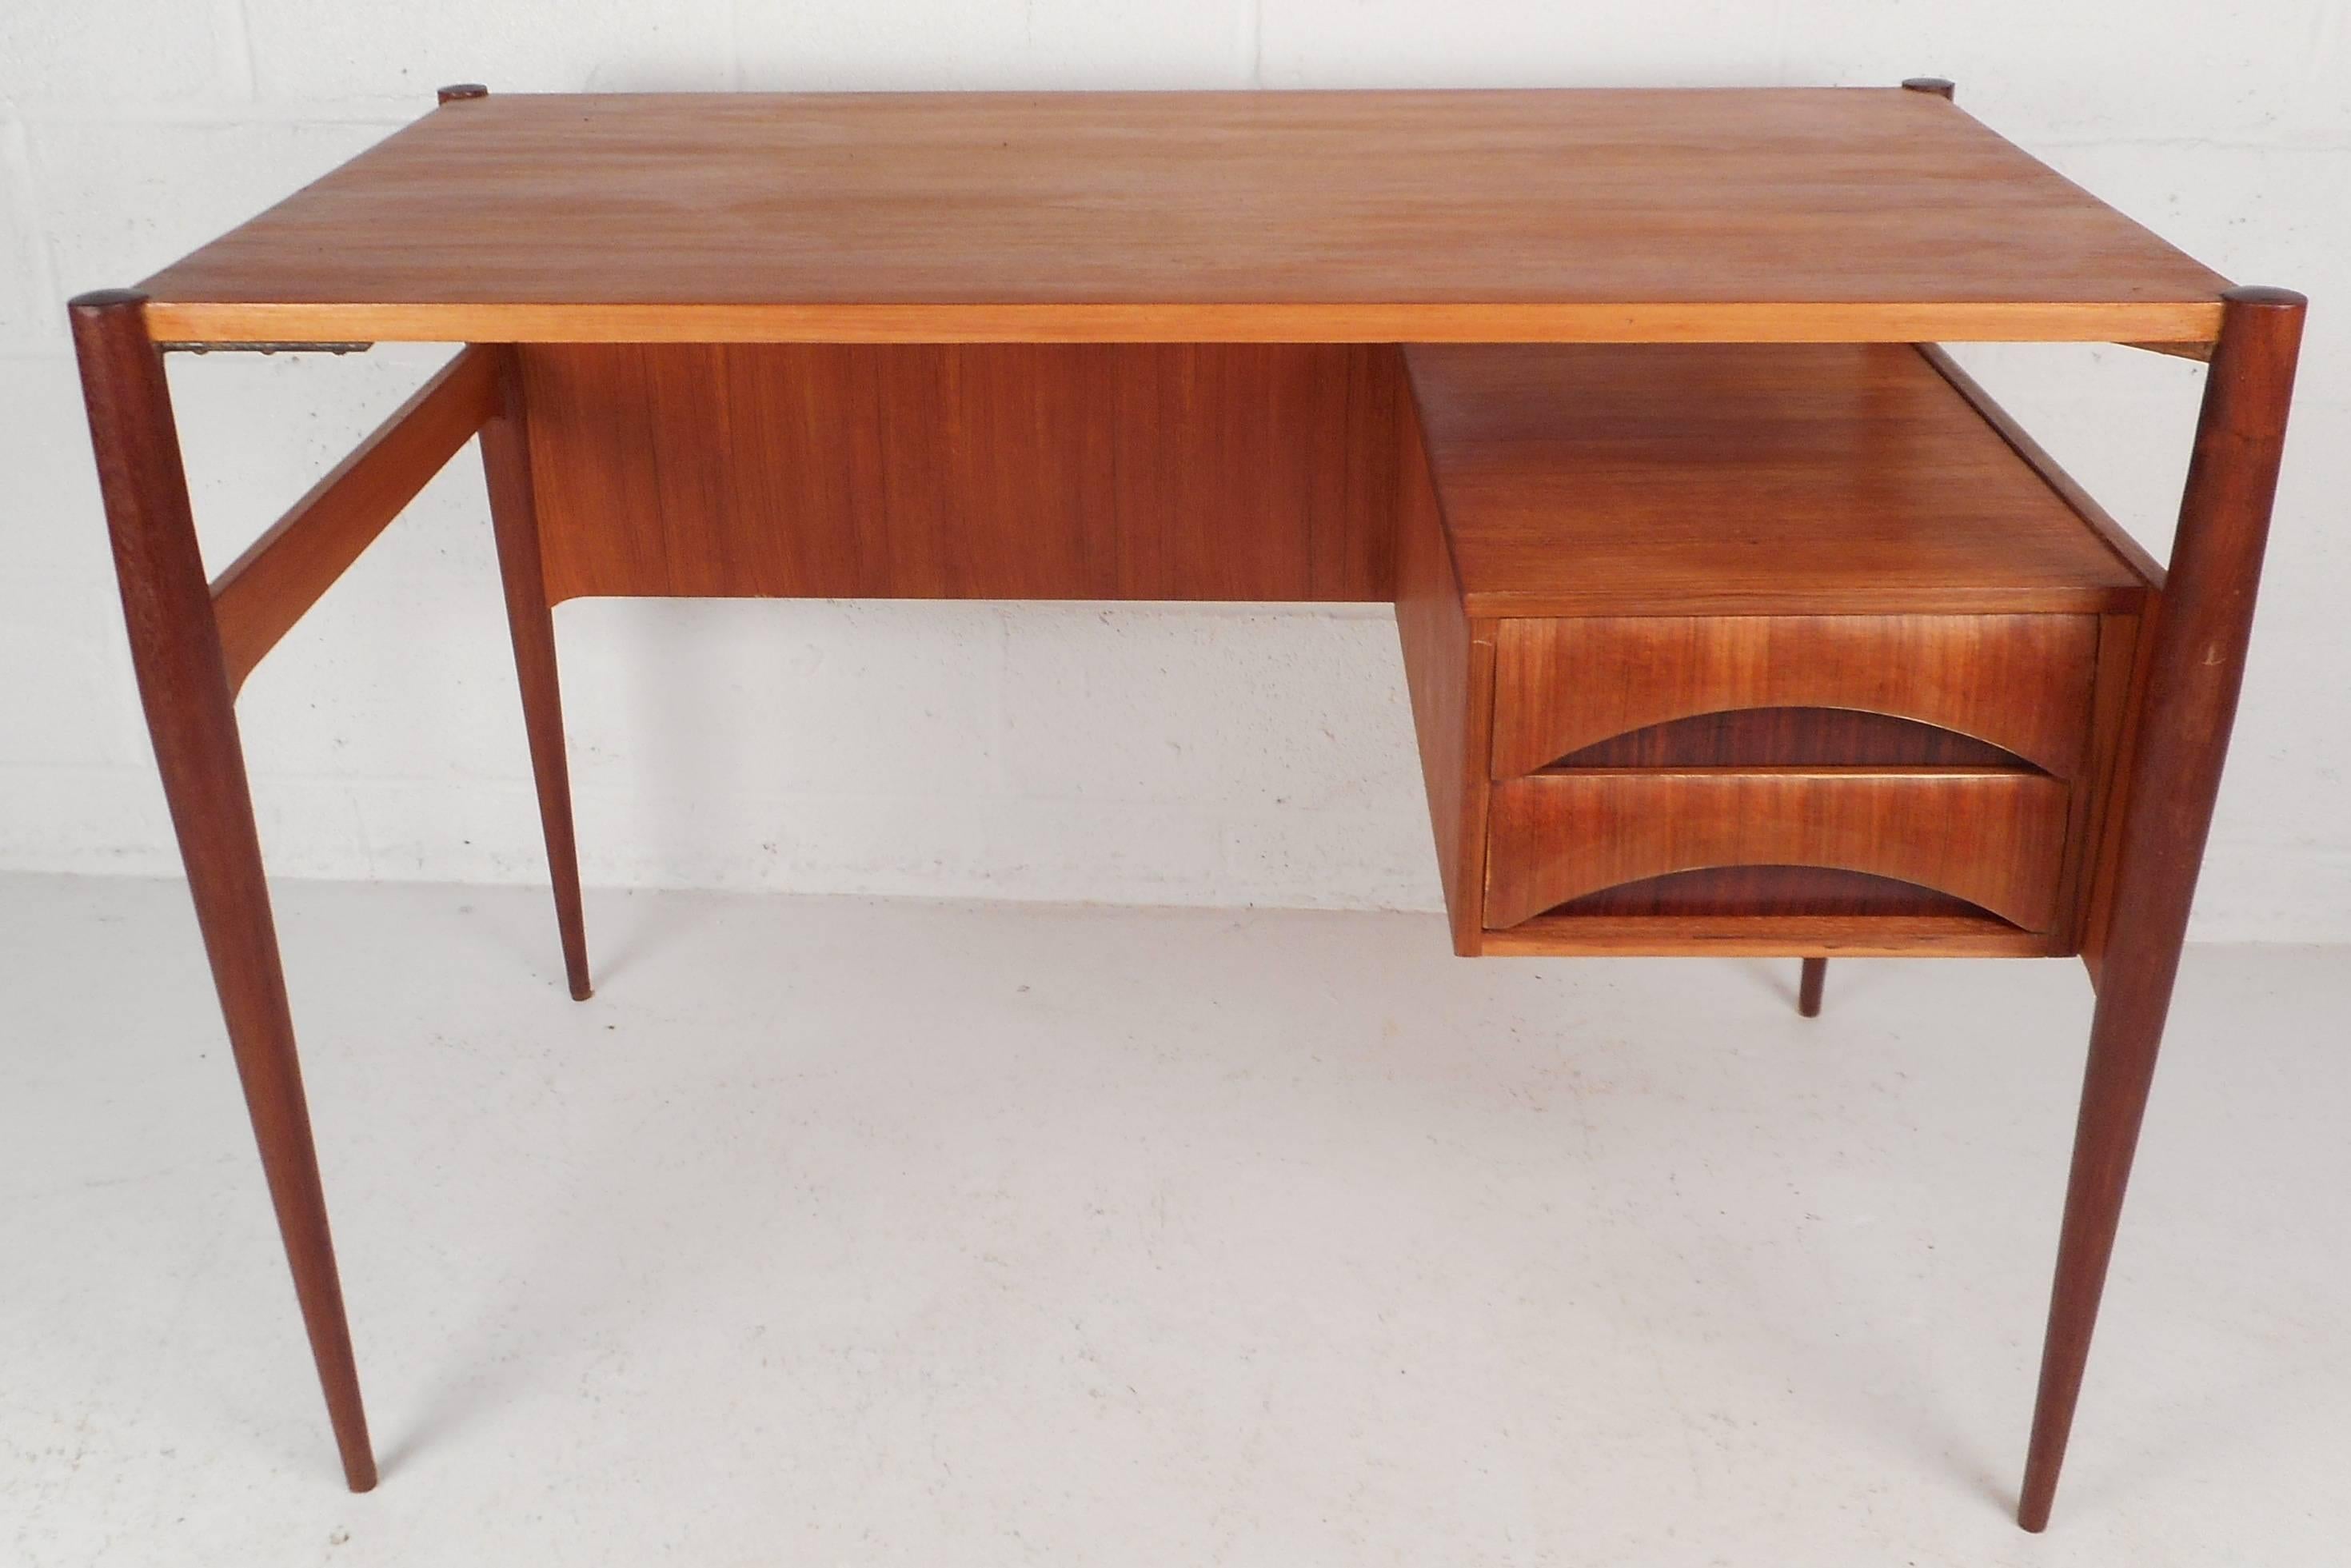 Stunning Mid-Century Modern Italian writing desk has two hefty drawers with eclipse pulls. The sleek two-tone design features teak and rosewood. Stylish tapered legs and a finished back make it the perfect addition to any modern interior. Newly